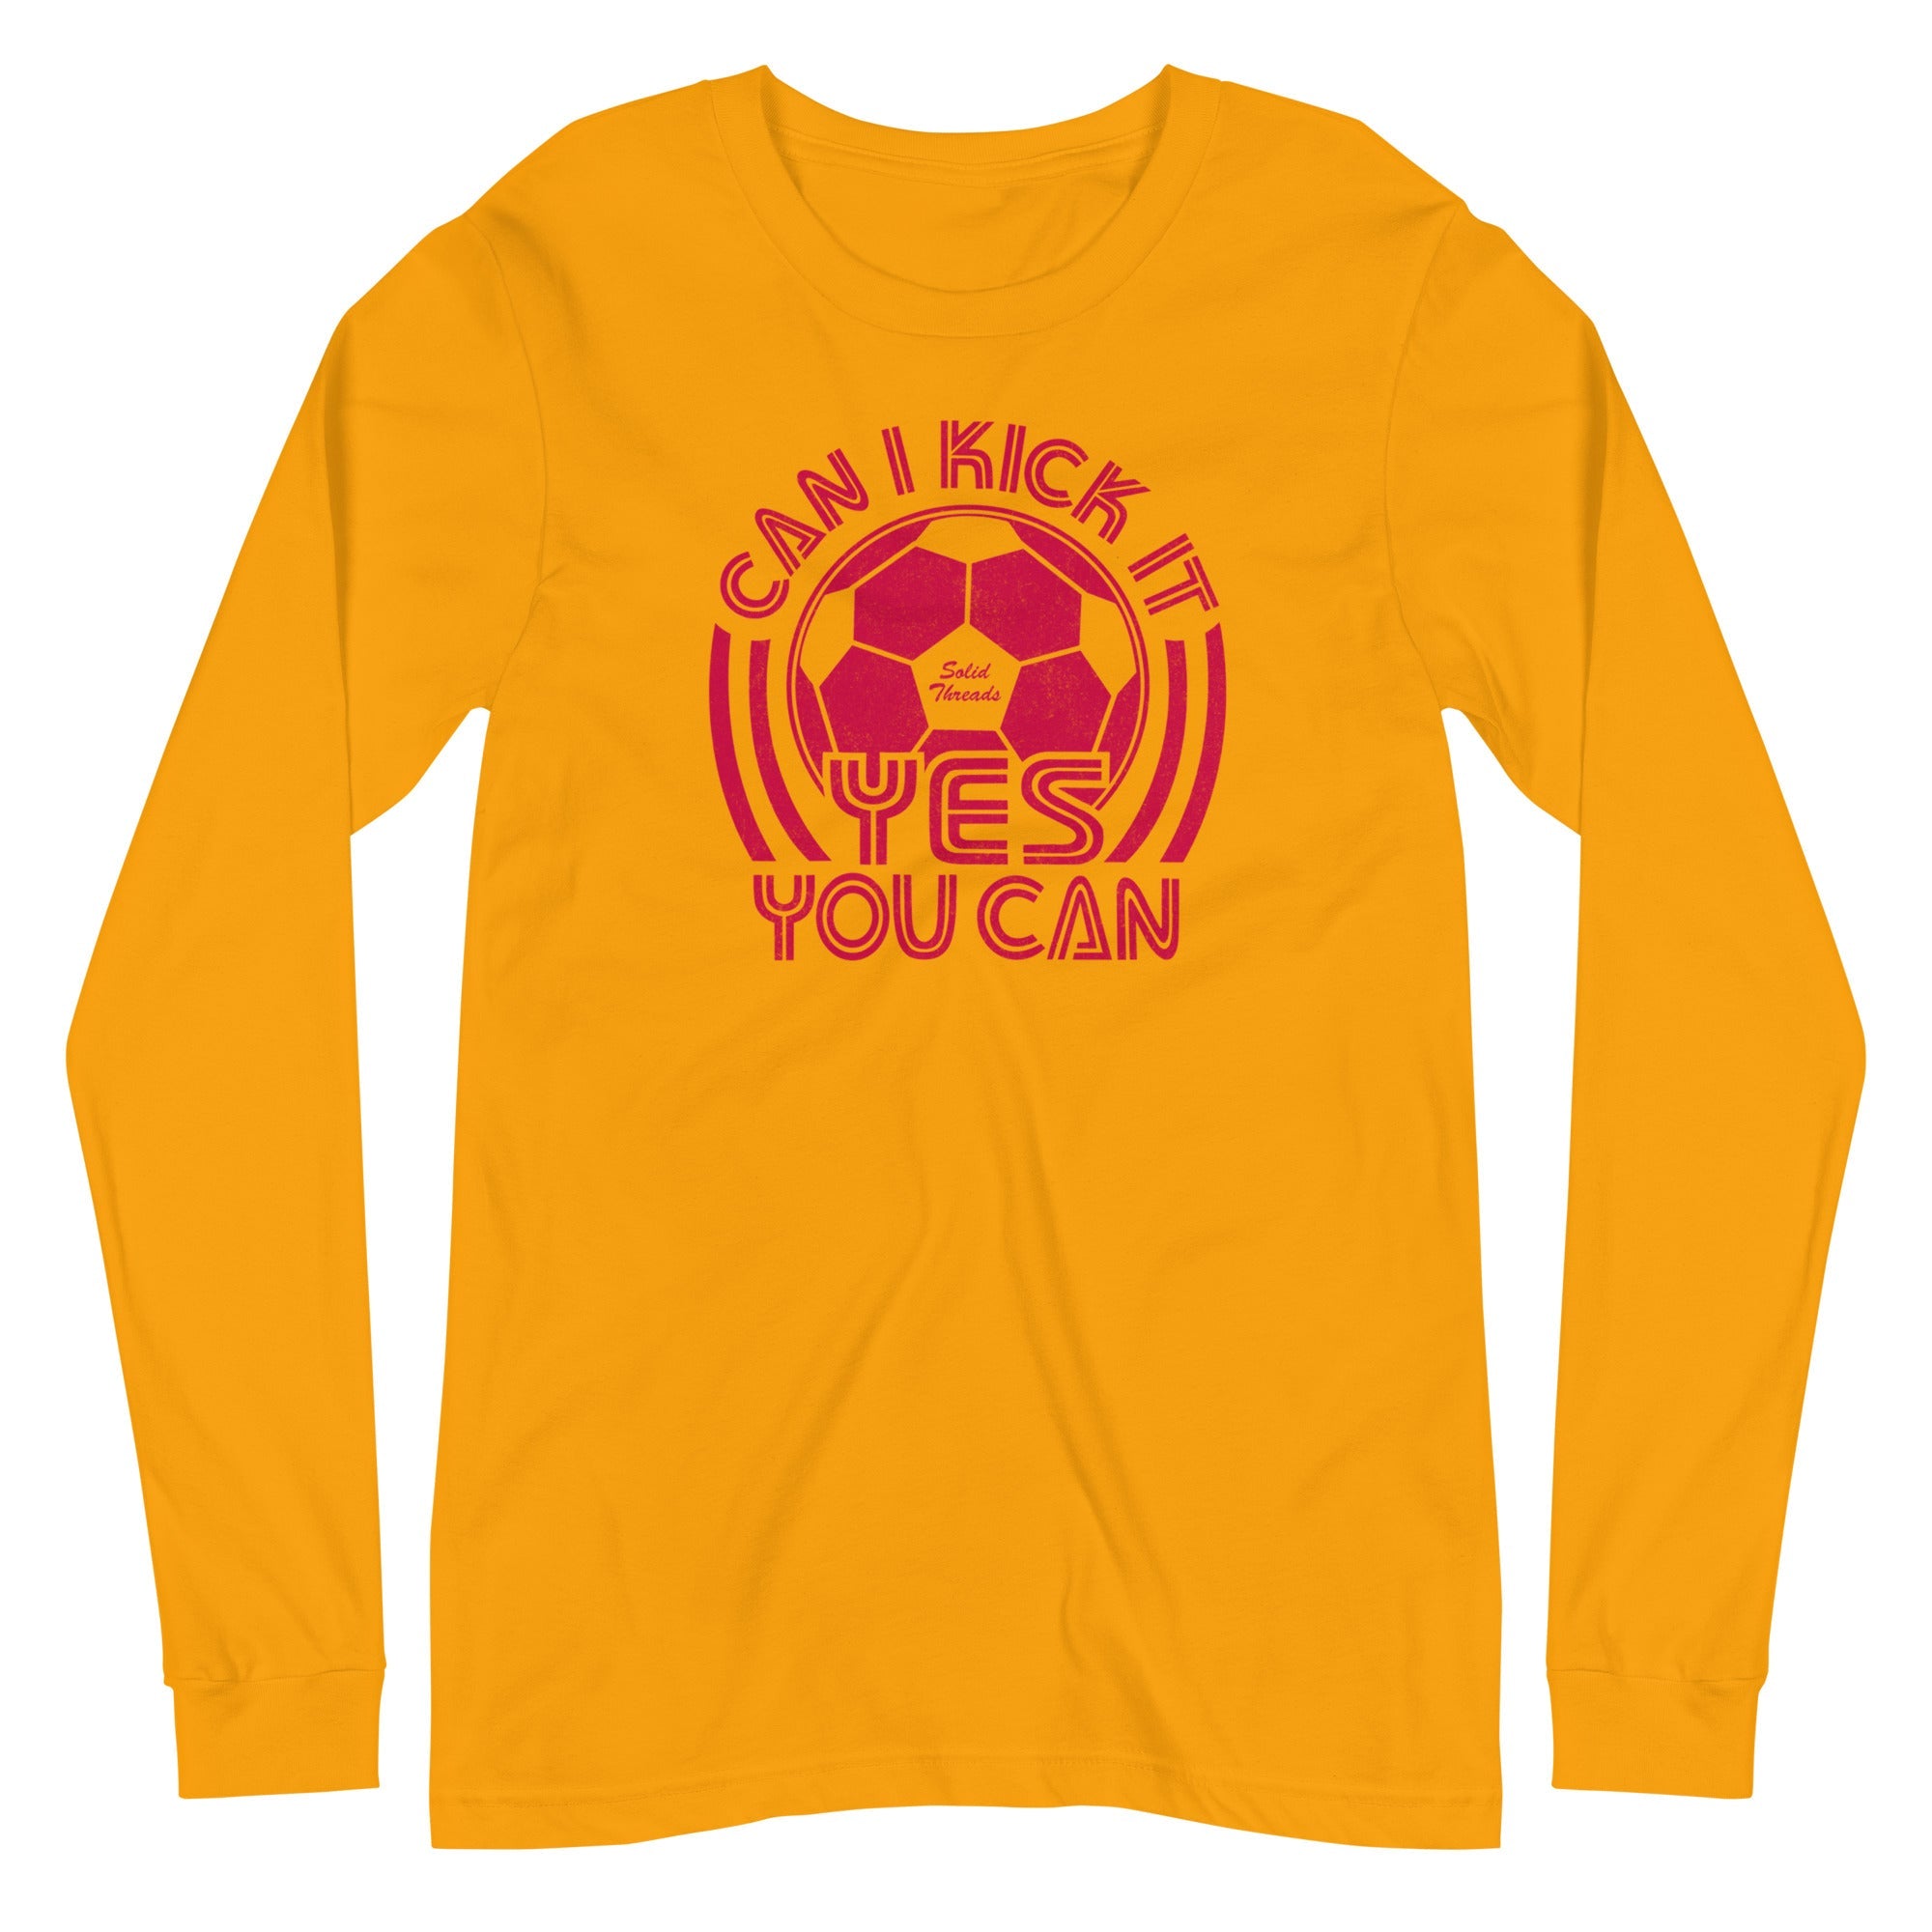 Unisex Can I Kick It, Yes You Can Long Sleeve Funny Graphic Tee | Vintage Soccer Gold T shirt | Solid Threads